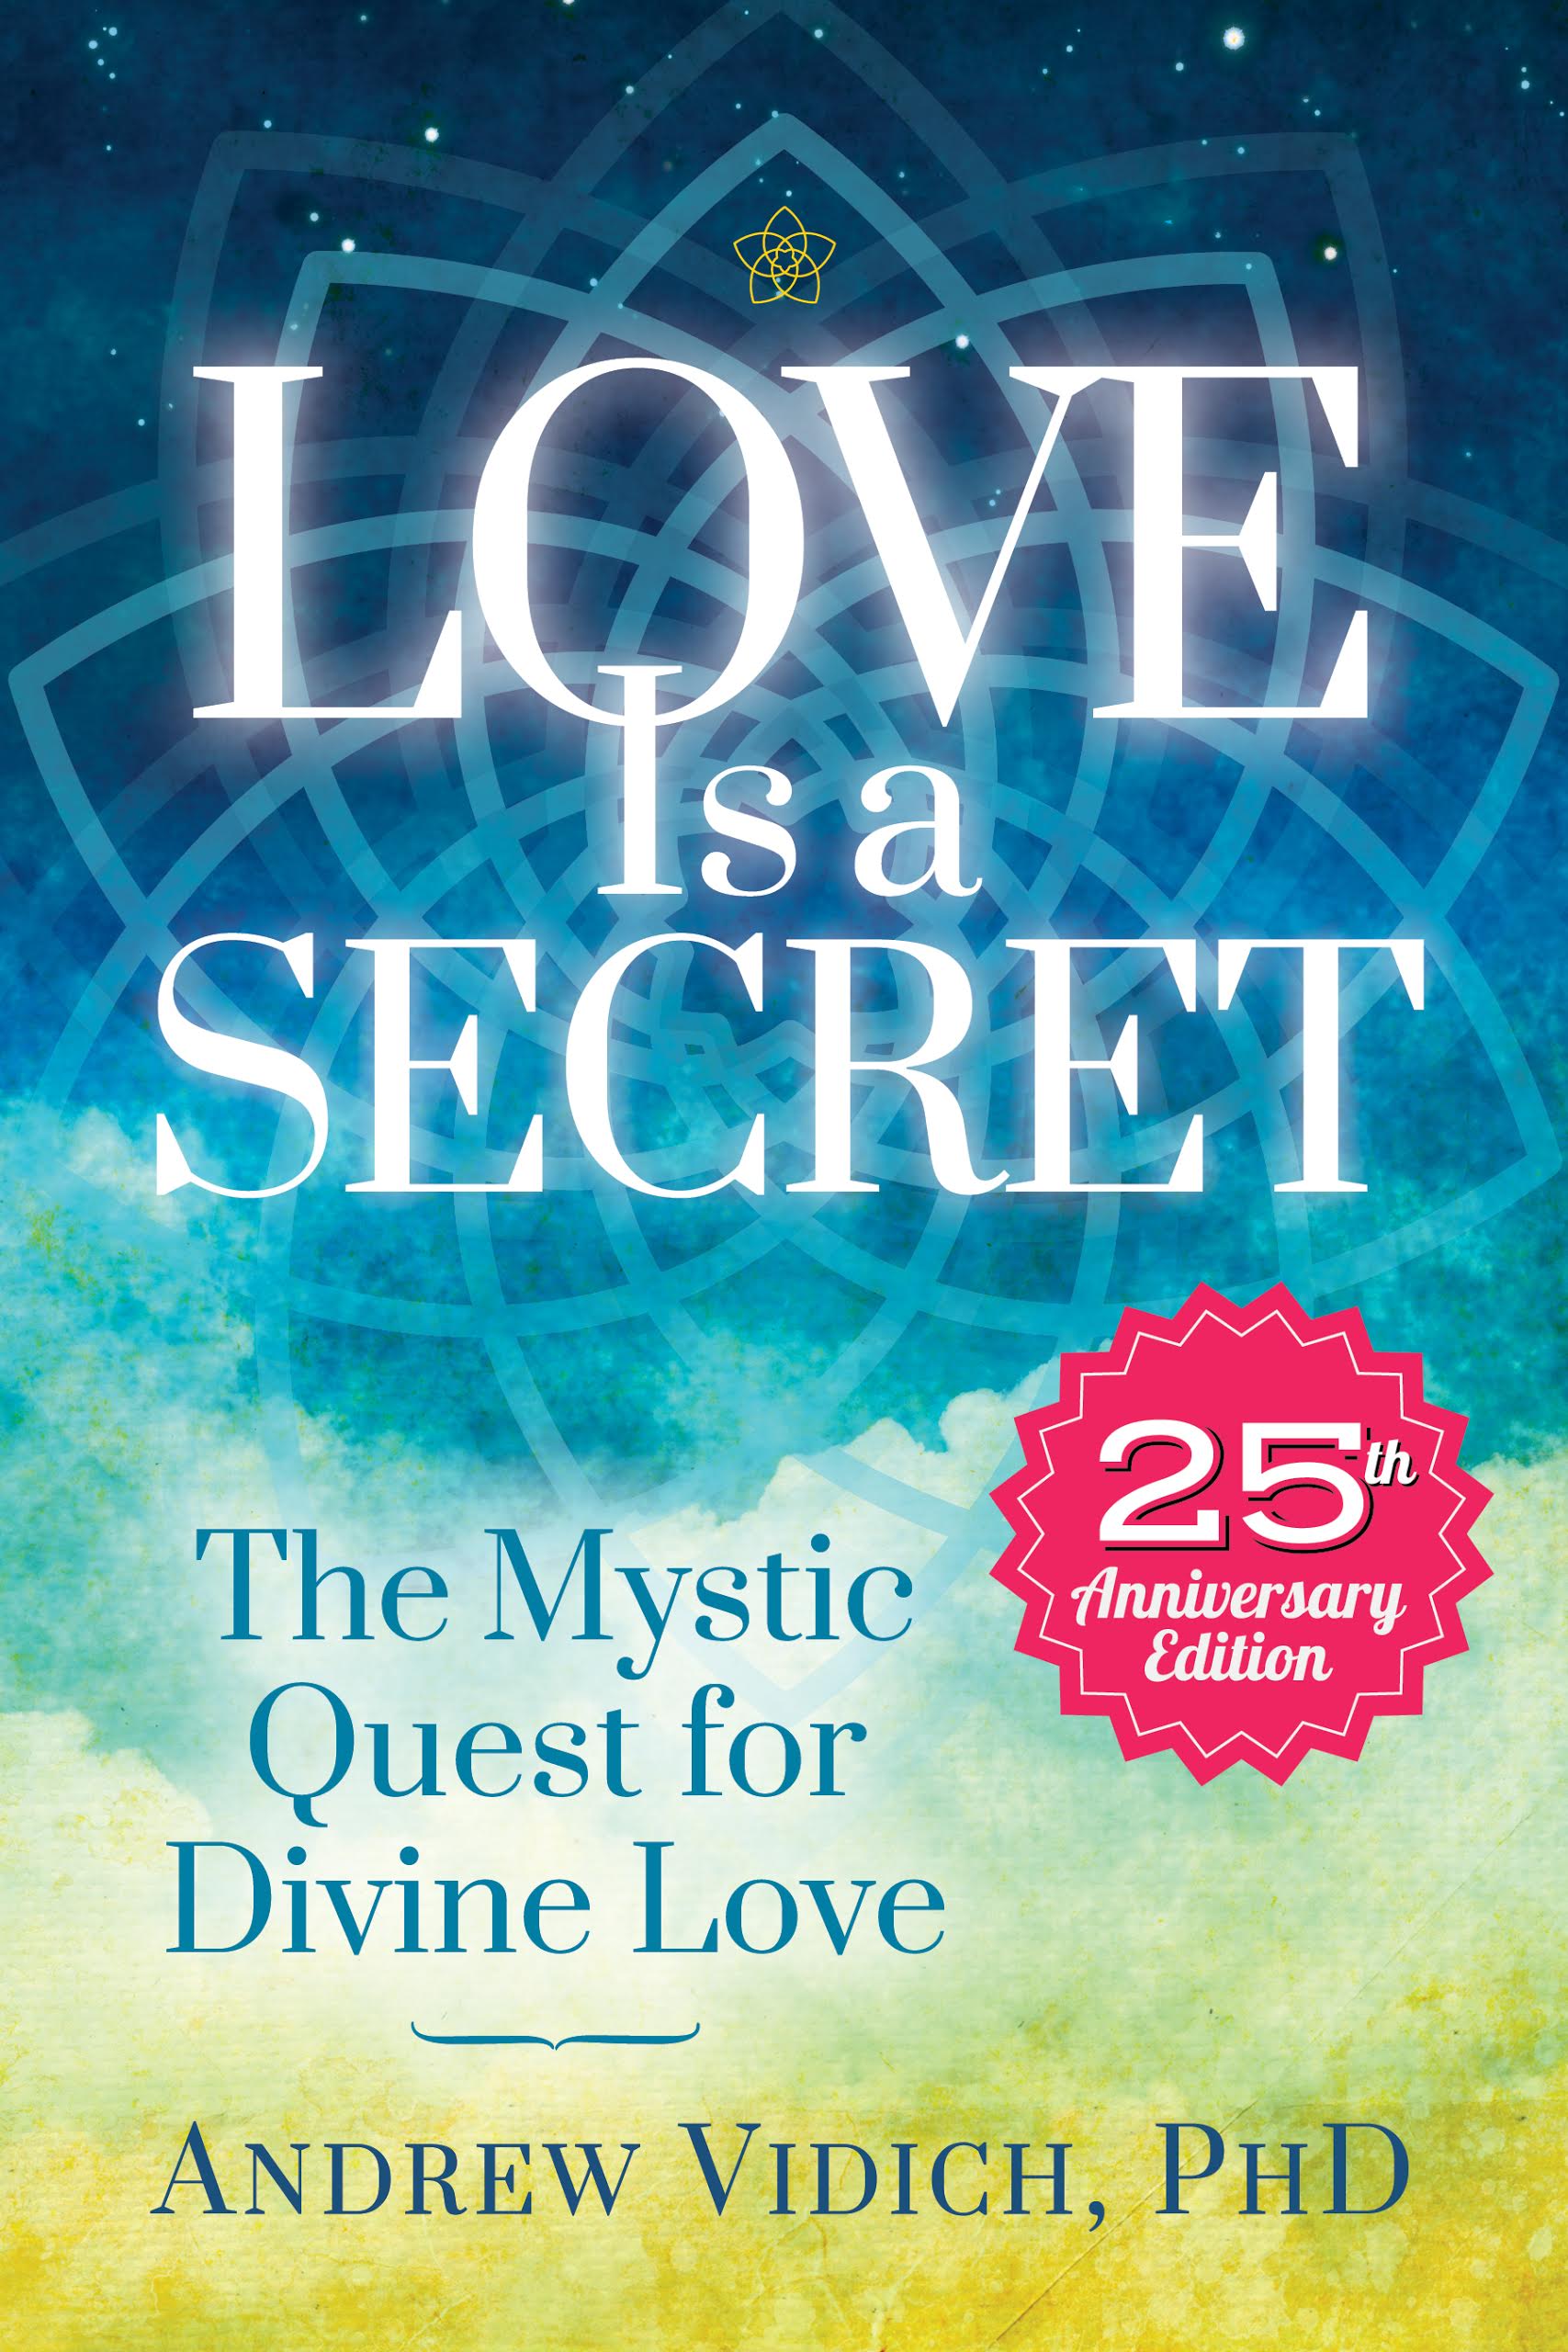 Dr. Andrew Vidich Free Book Launch Event Friday August 21st: Love Is a Secret - in NYC! @ The Center for Remembering and Sharing | New York | New York | United States